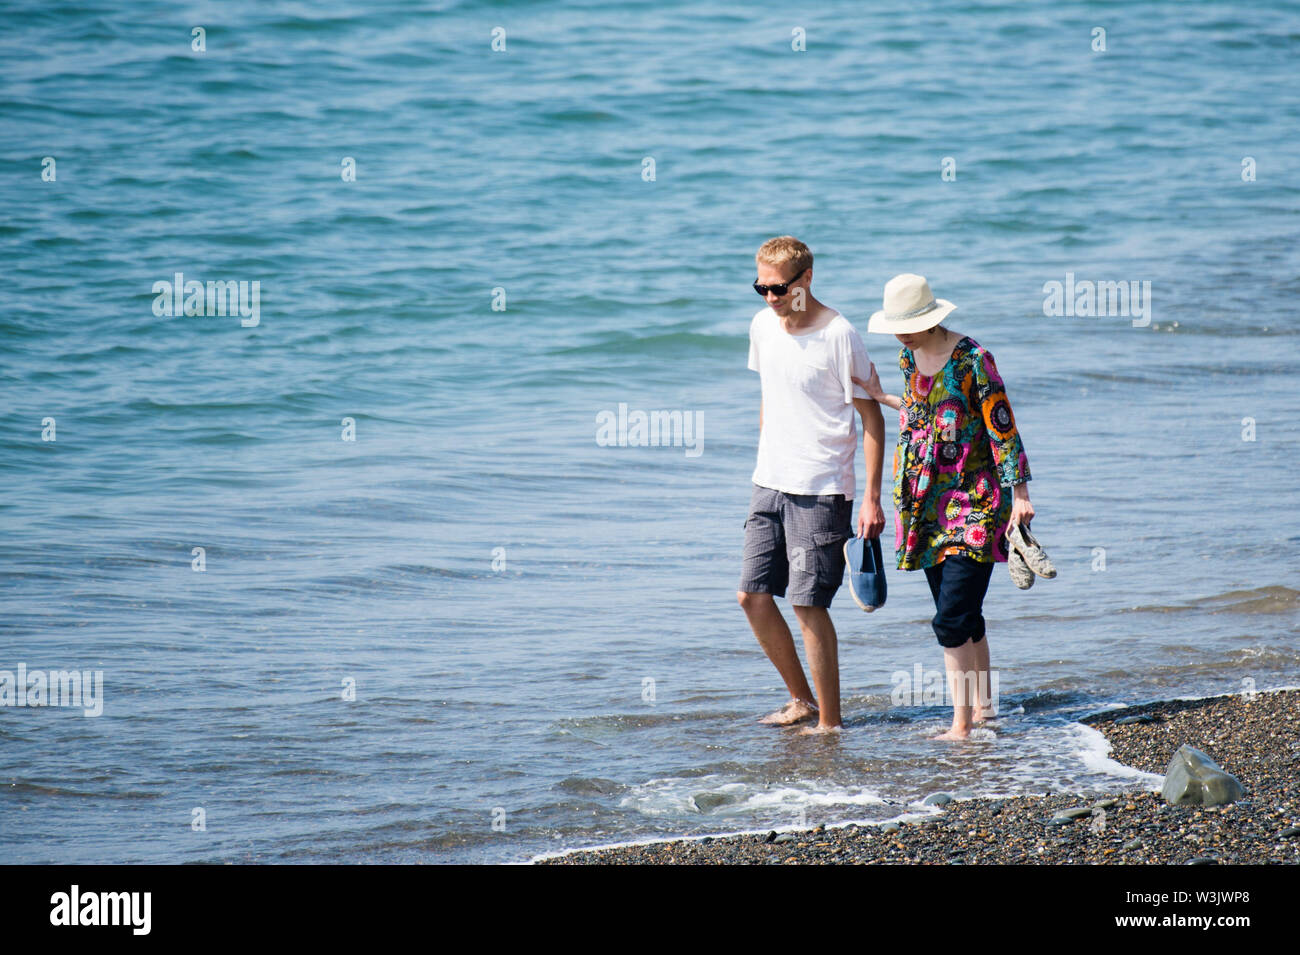 Aberystwyth Wales UK, Tuesday 16 July 2019 UK Weather: A couple walking in the shallow water at the seaside in Aberystwyth on a beautifully warm summers day in west Wales. photo Credit: keith morris/Alamy Live News Stock Photo